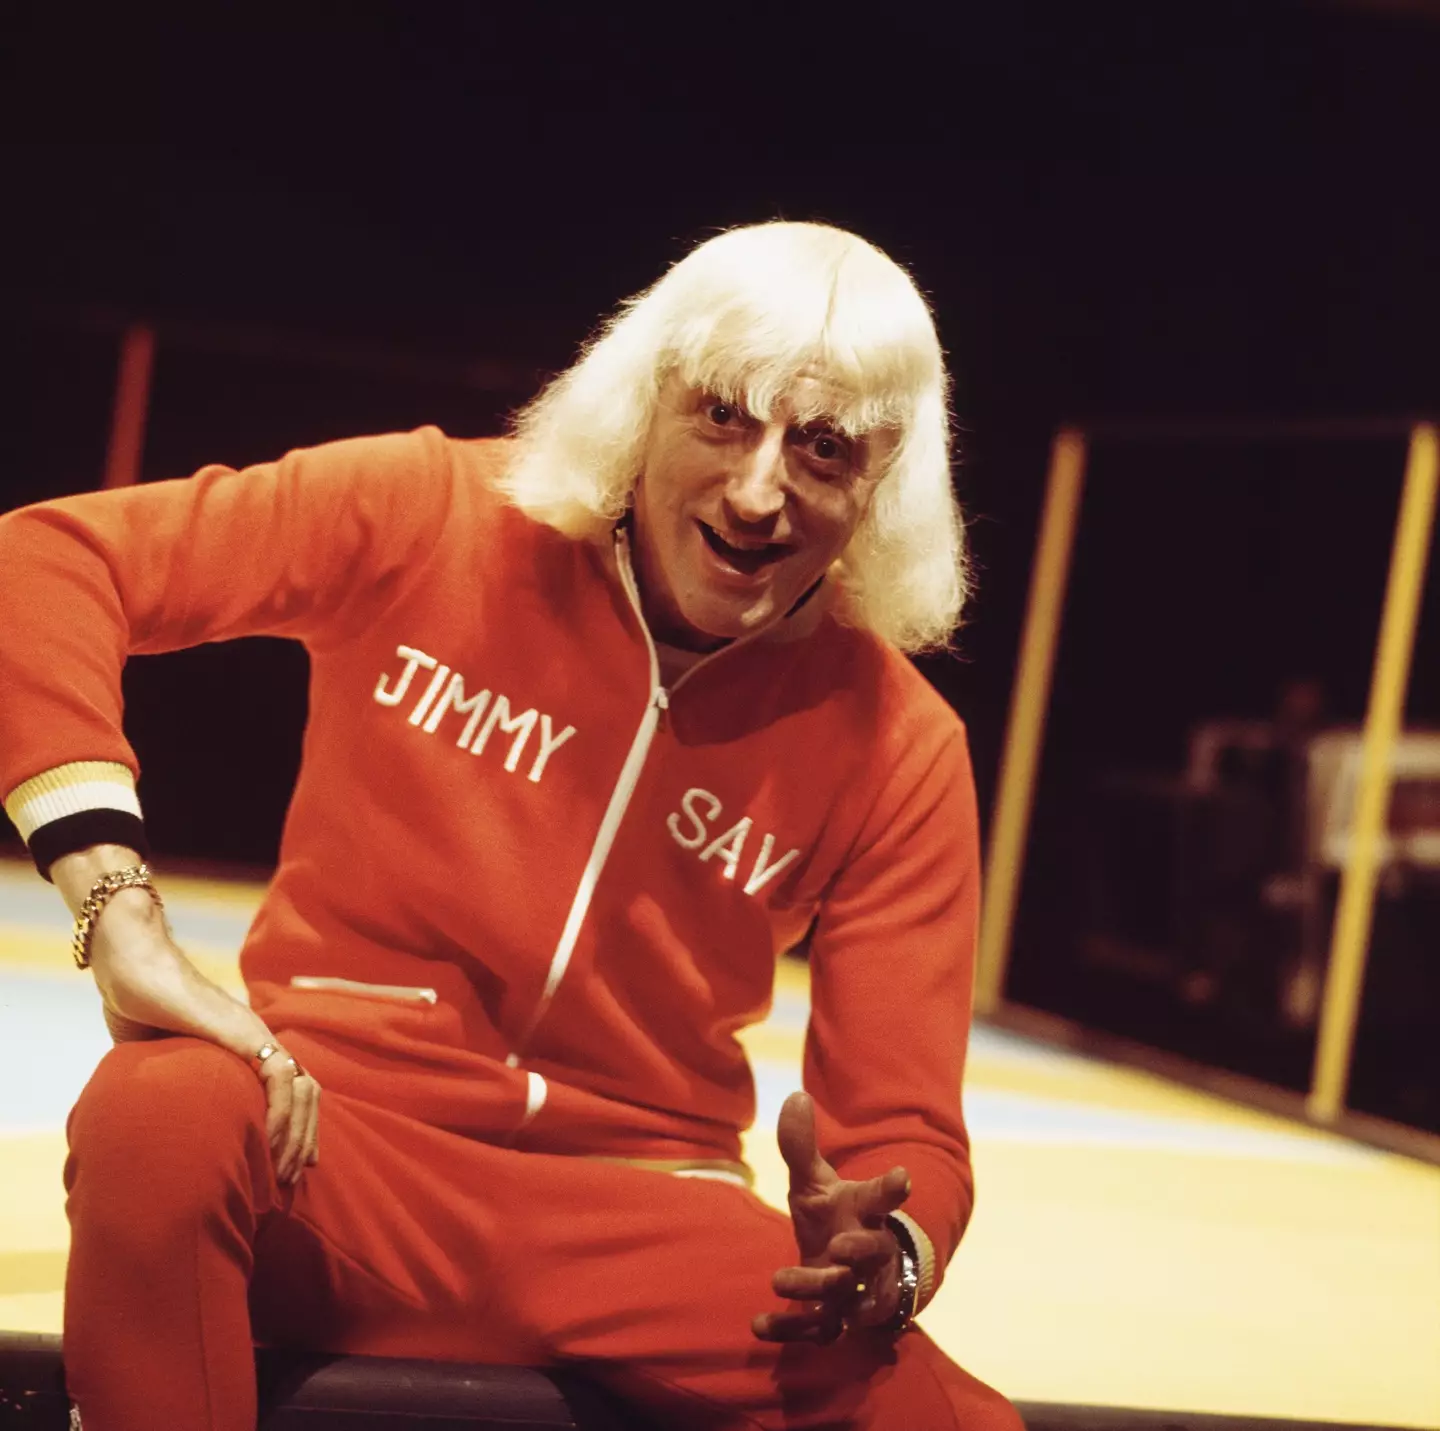 Savile abused countless young women and girls over decades.